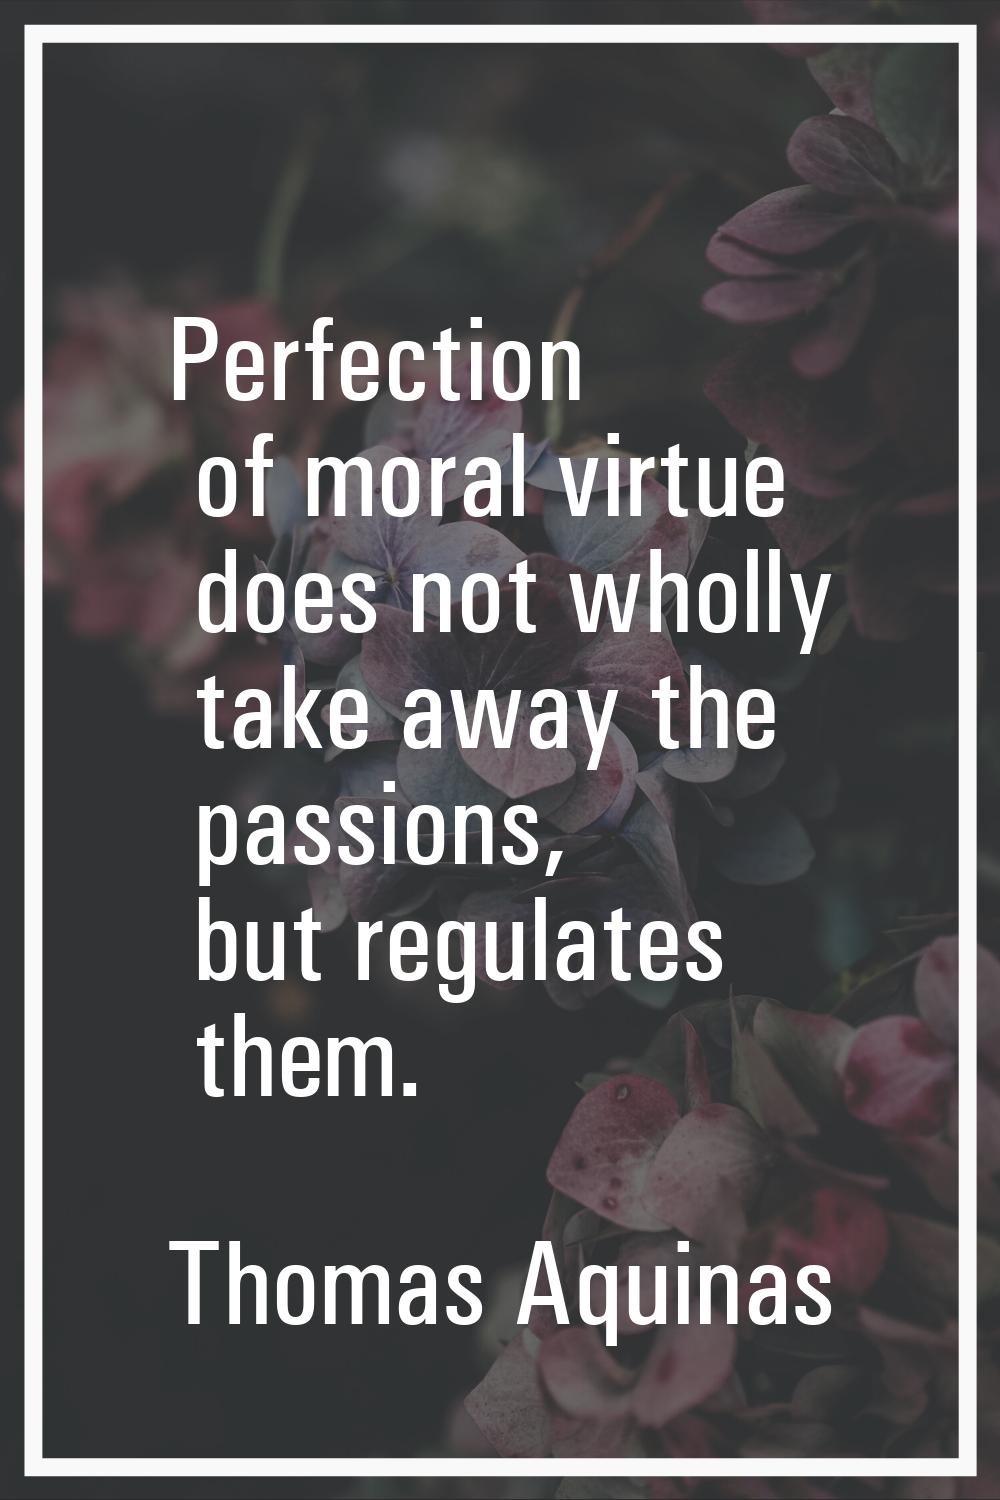 Perfection of moral virtue does not wholly take away the passions, but regulates them.